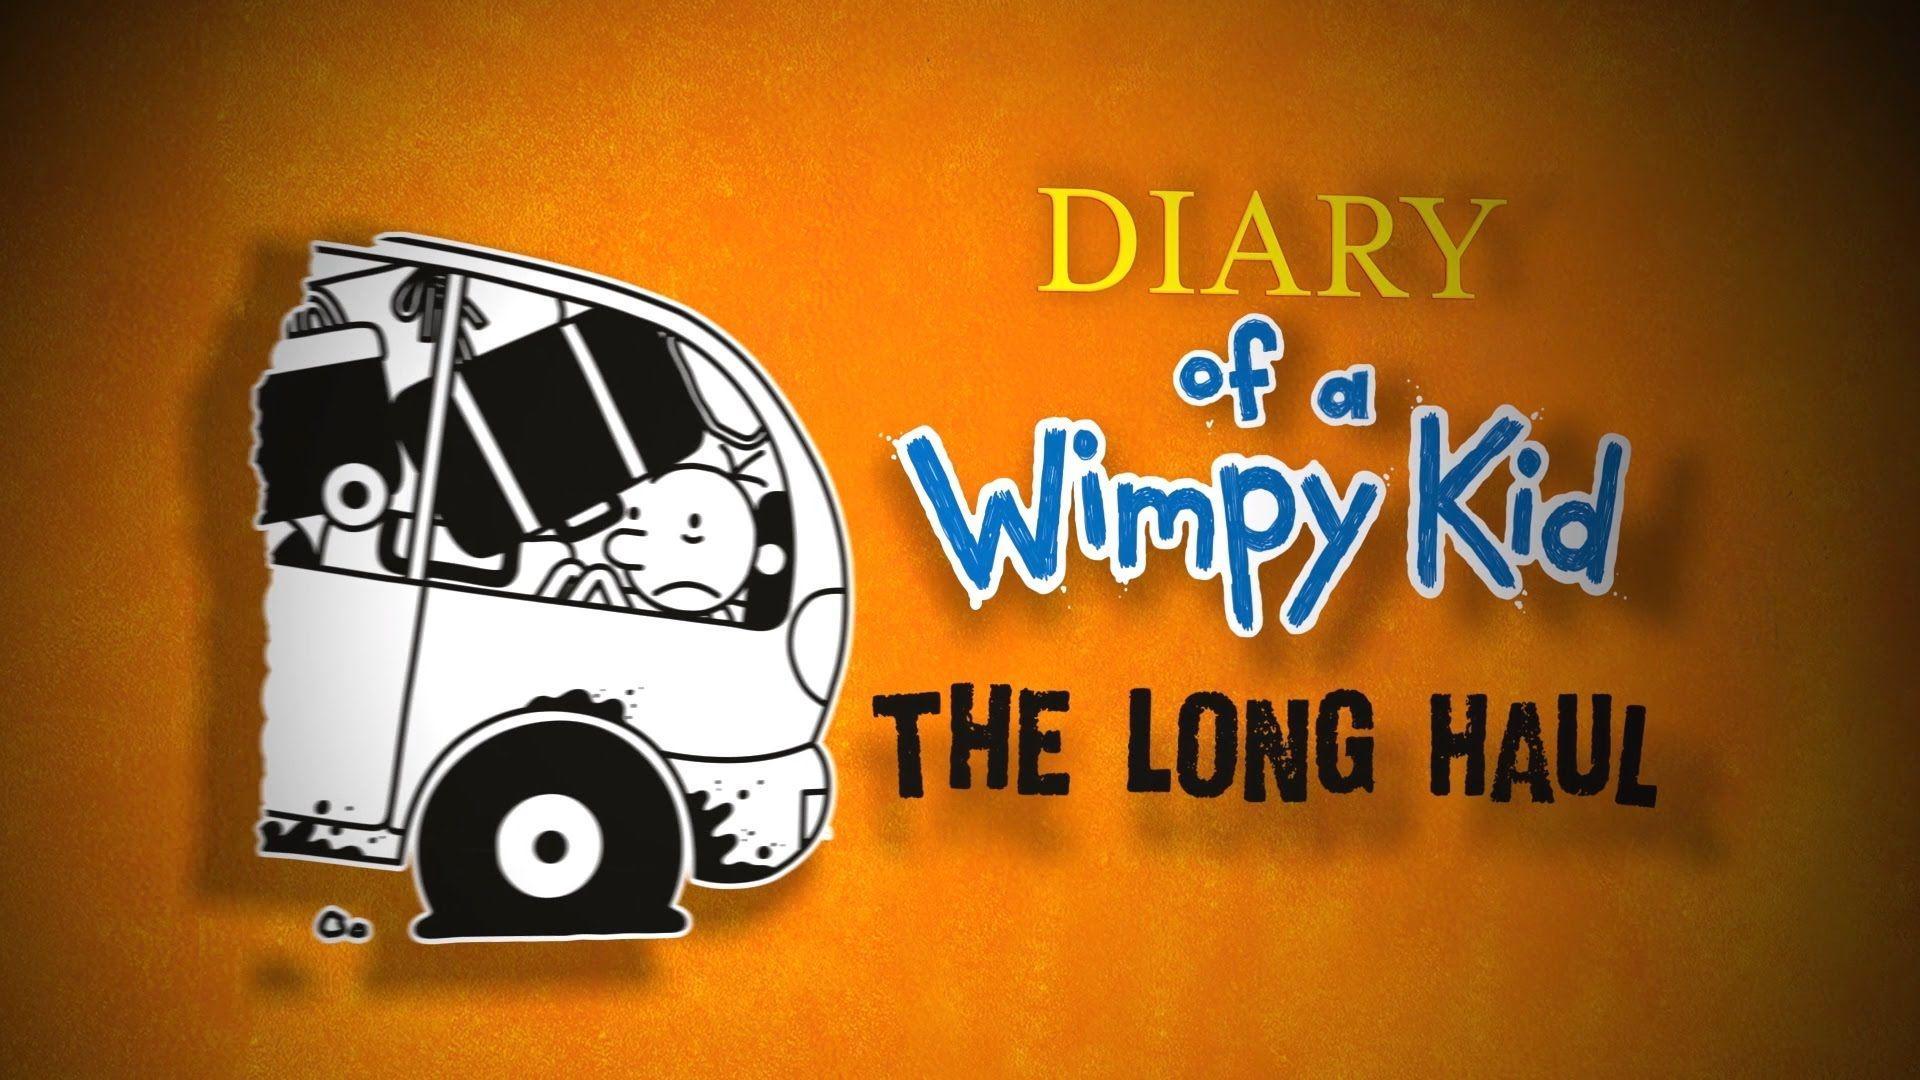 Diary of a Wimpy Kid: The Long Haul Movie Wallpaper